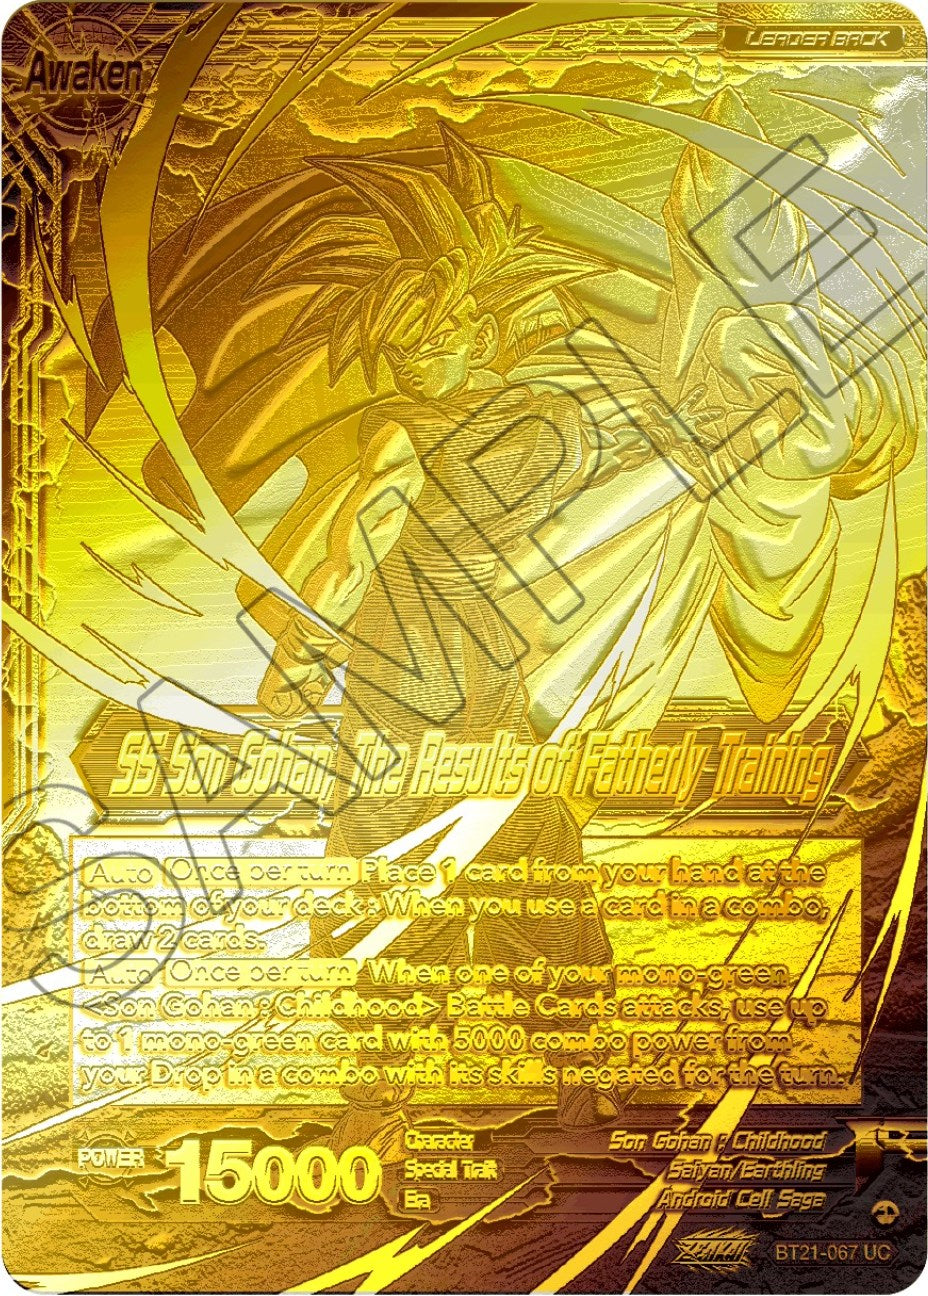 Son Gohan // SS Son Gohan, The Results of Fatherly Training (2023 Championship Finals) (Gold Metal Foil) (BT21-067) [Tournament Promotion Cards] | Devastation Store